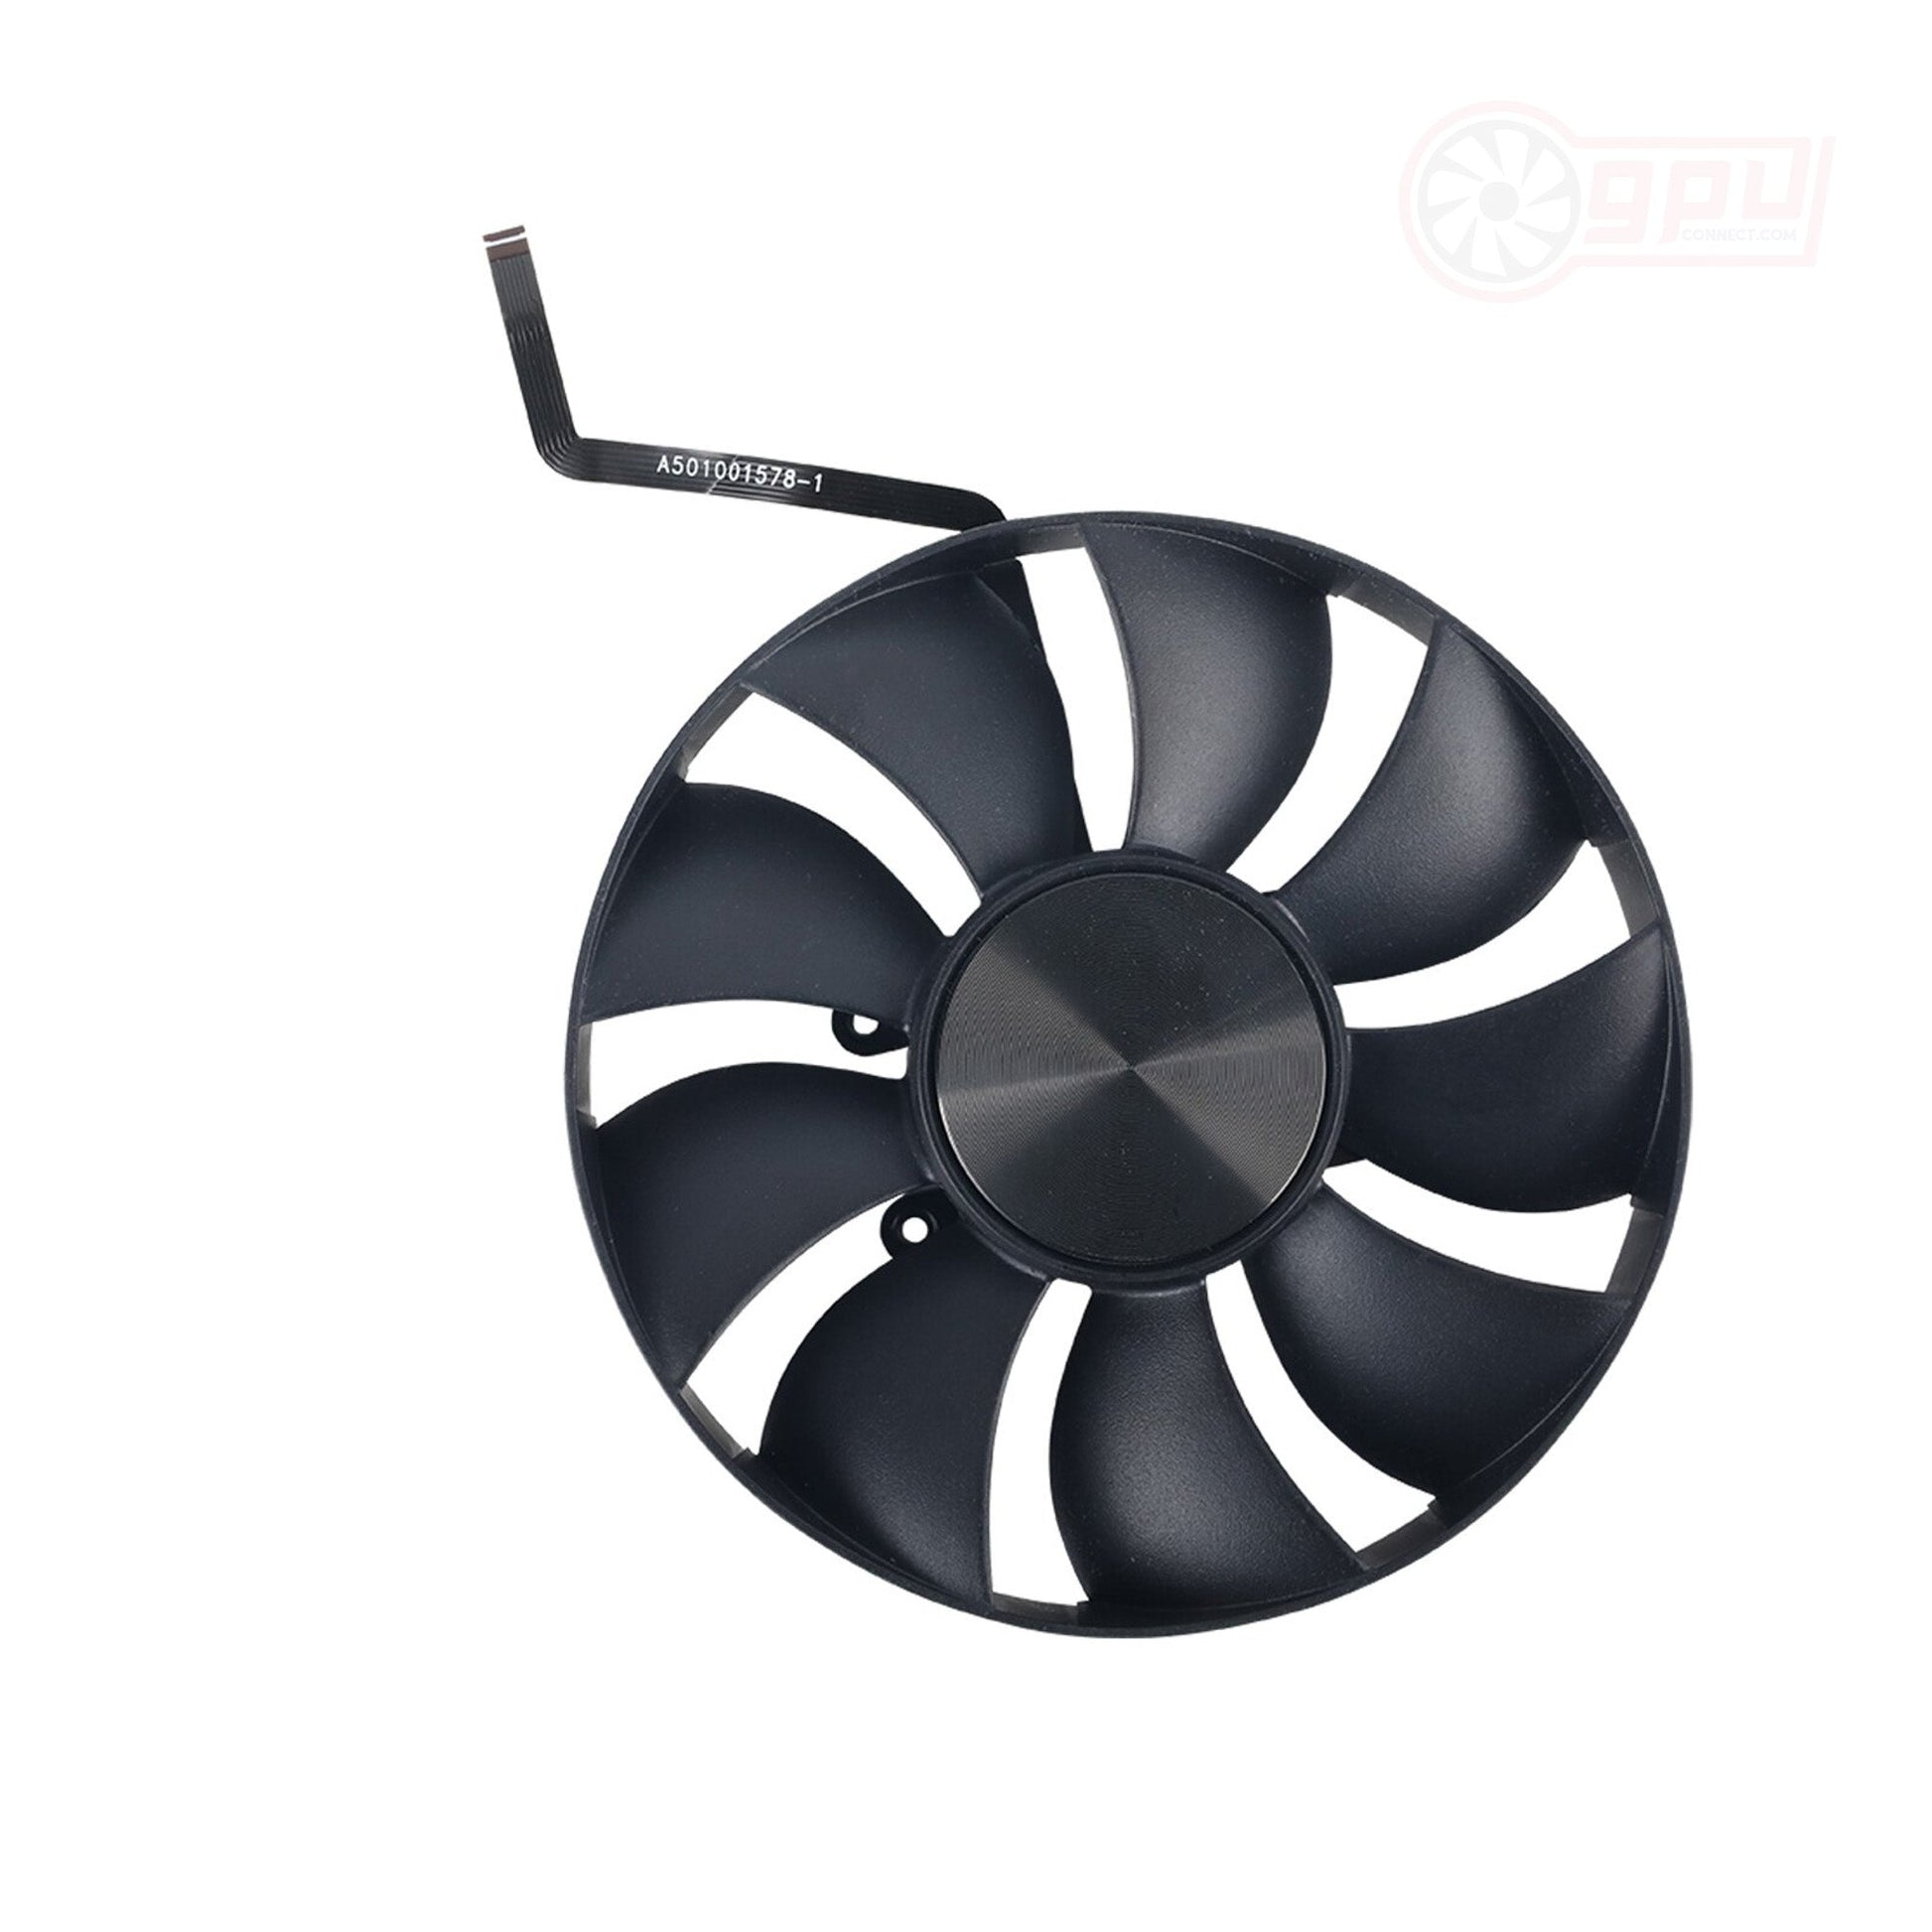 NVIDIA GeForce RTX 3090 3090 Ti Founders Edition FE Replacement Fans - GPUCONNECT.COM